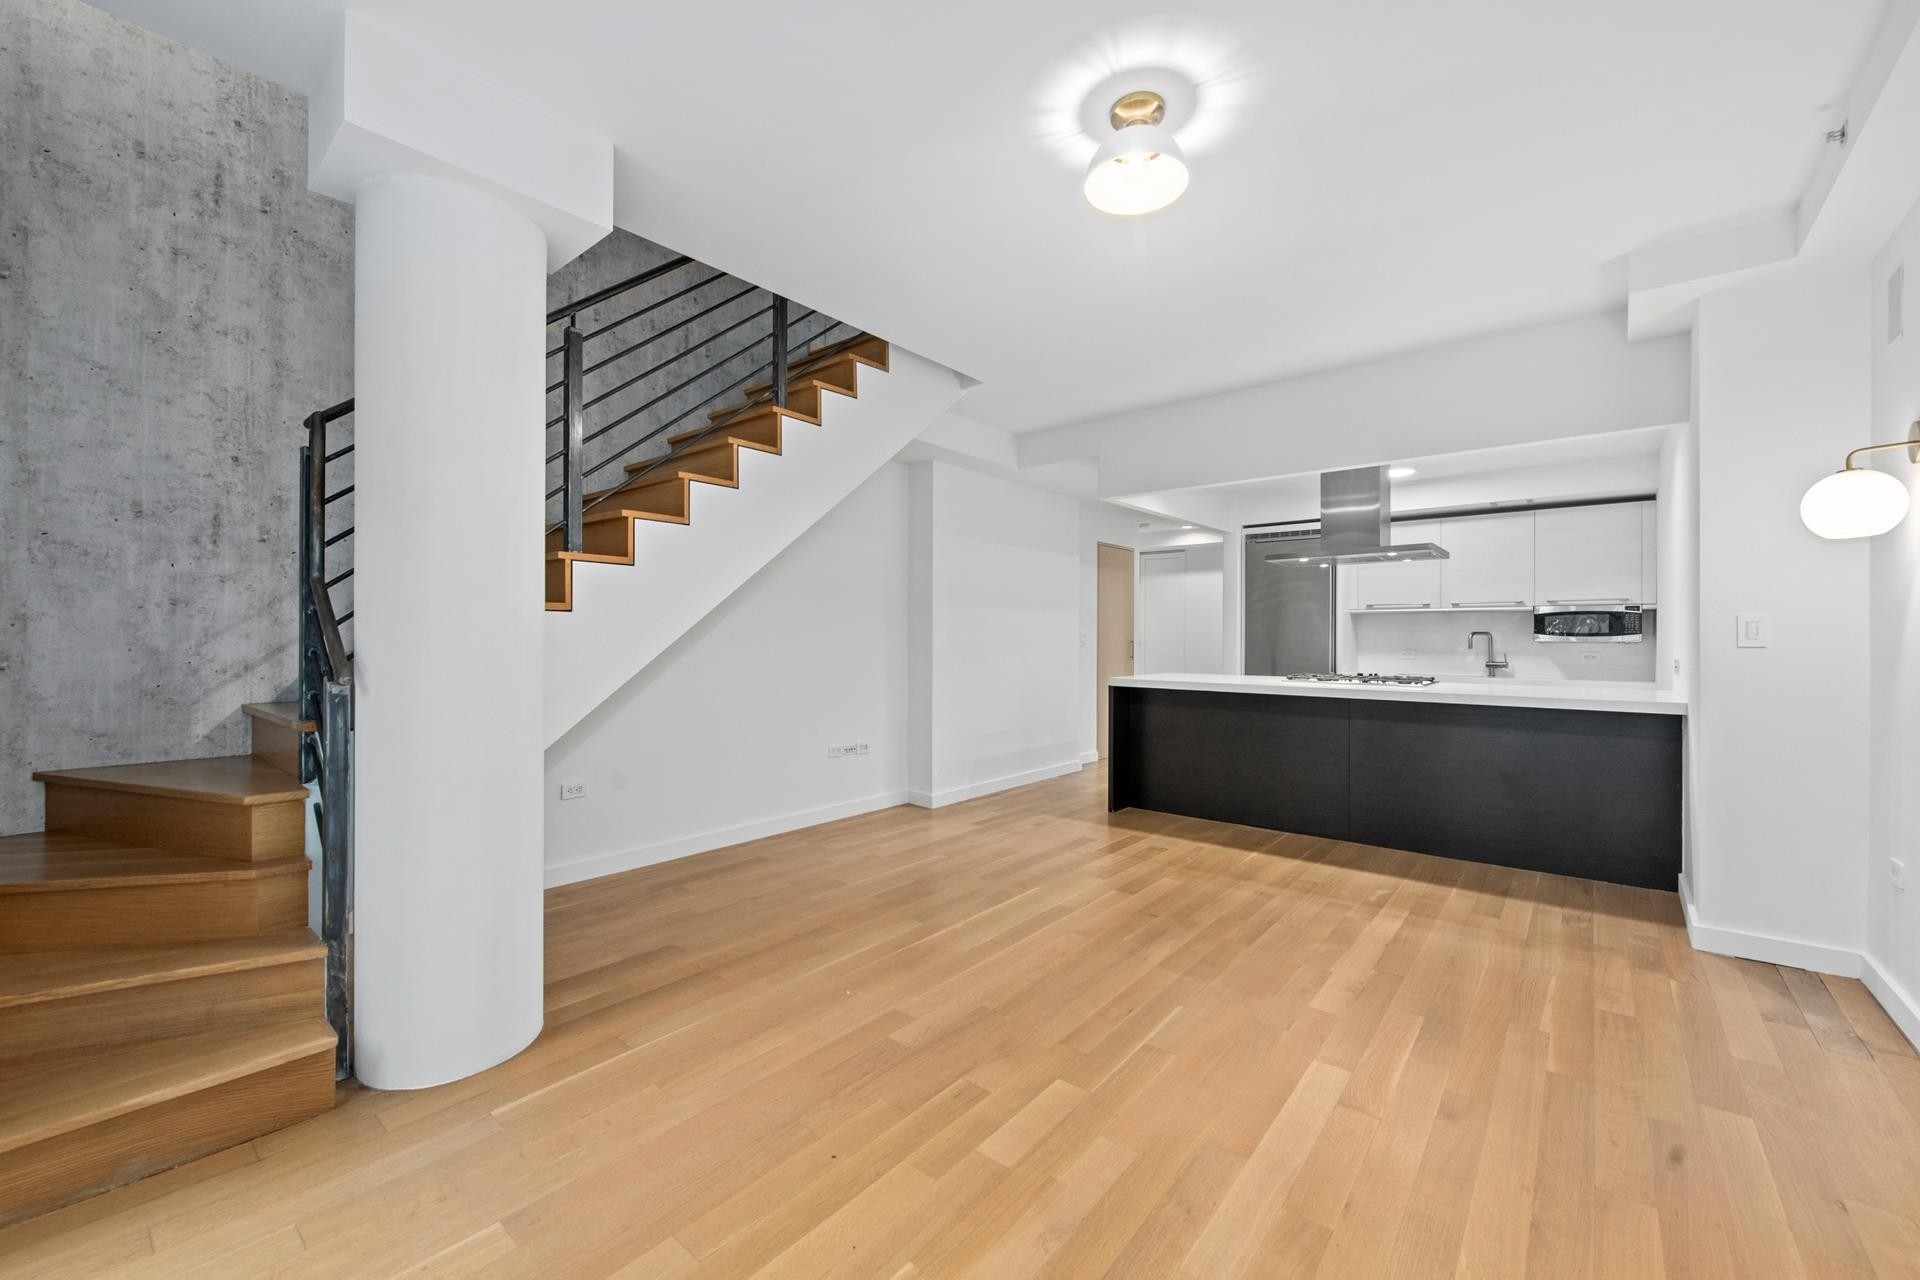 5. Condominiums for Sale at Village Green, 311 E 11TH ST, 1A East Village, New York, NY 10003